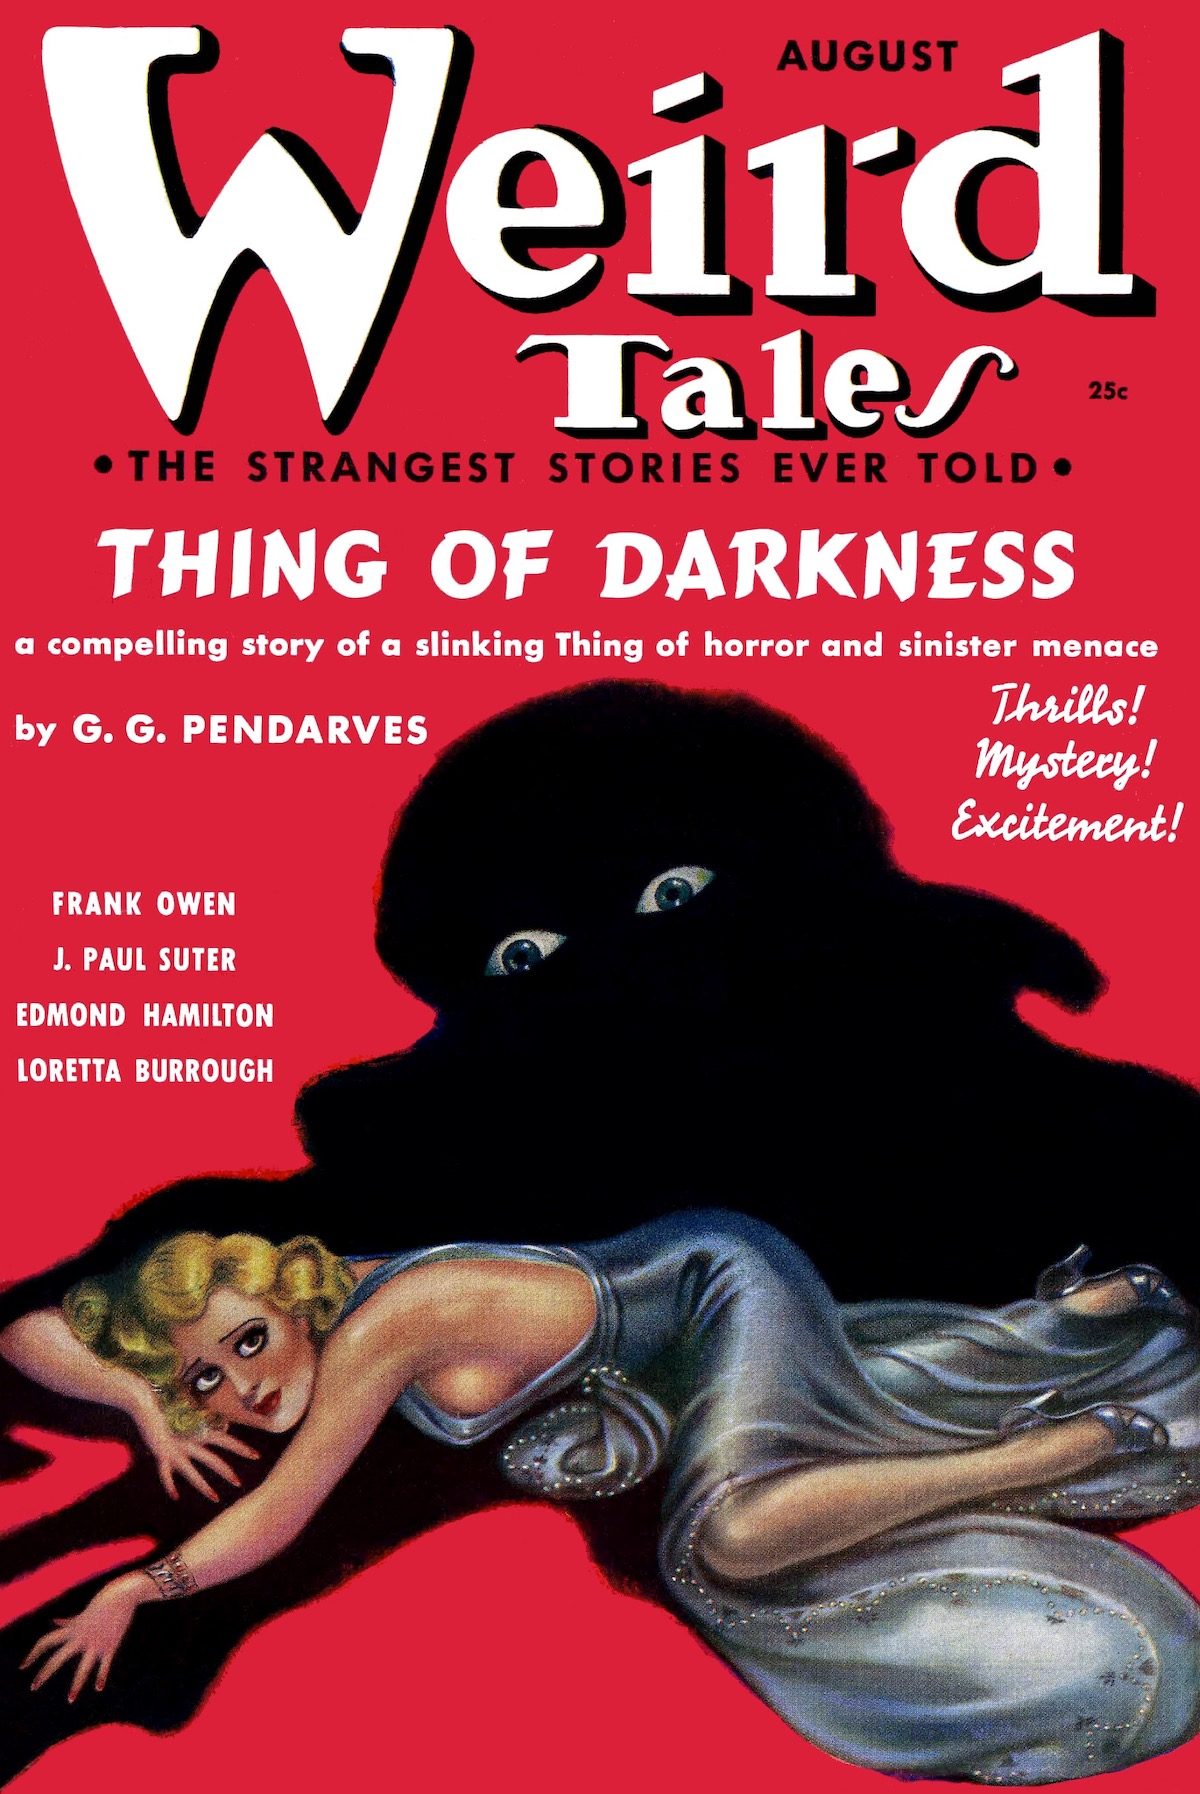 Weird Tales covers Margaret Brundage